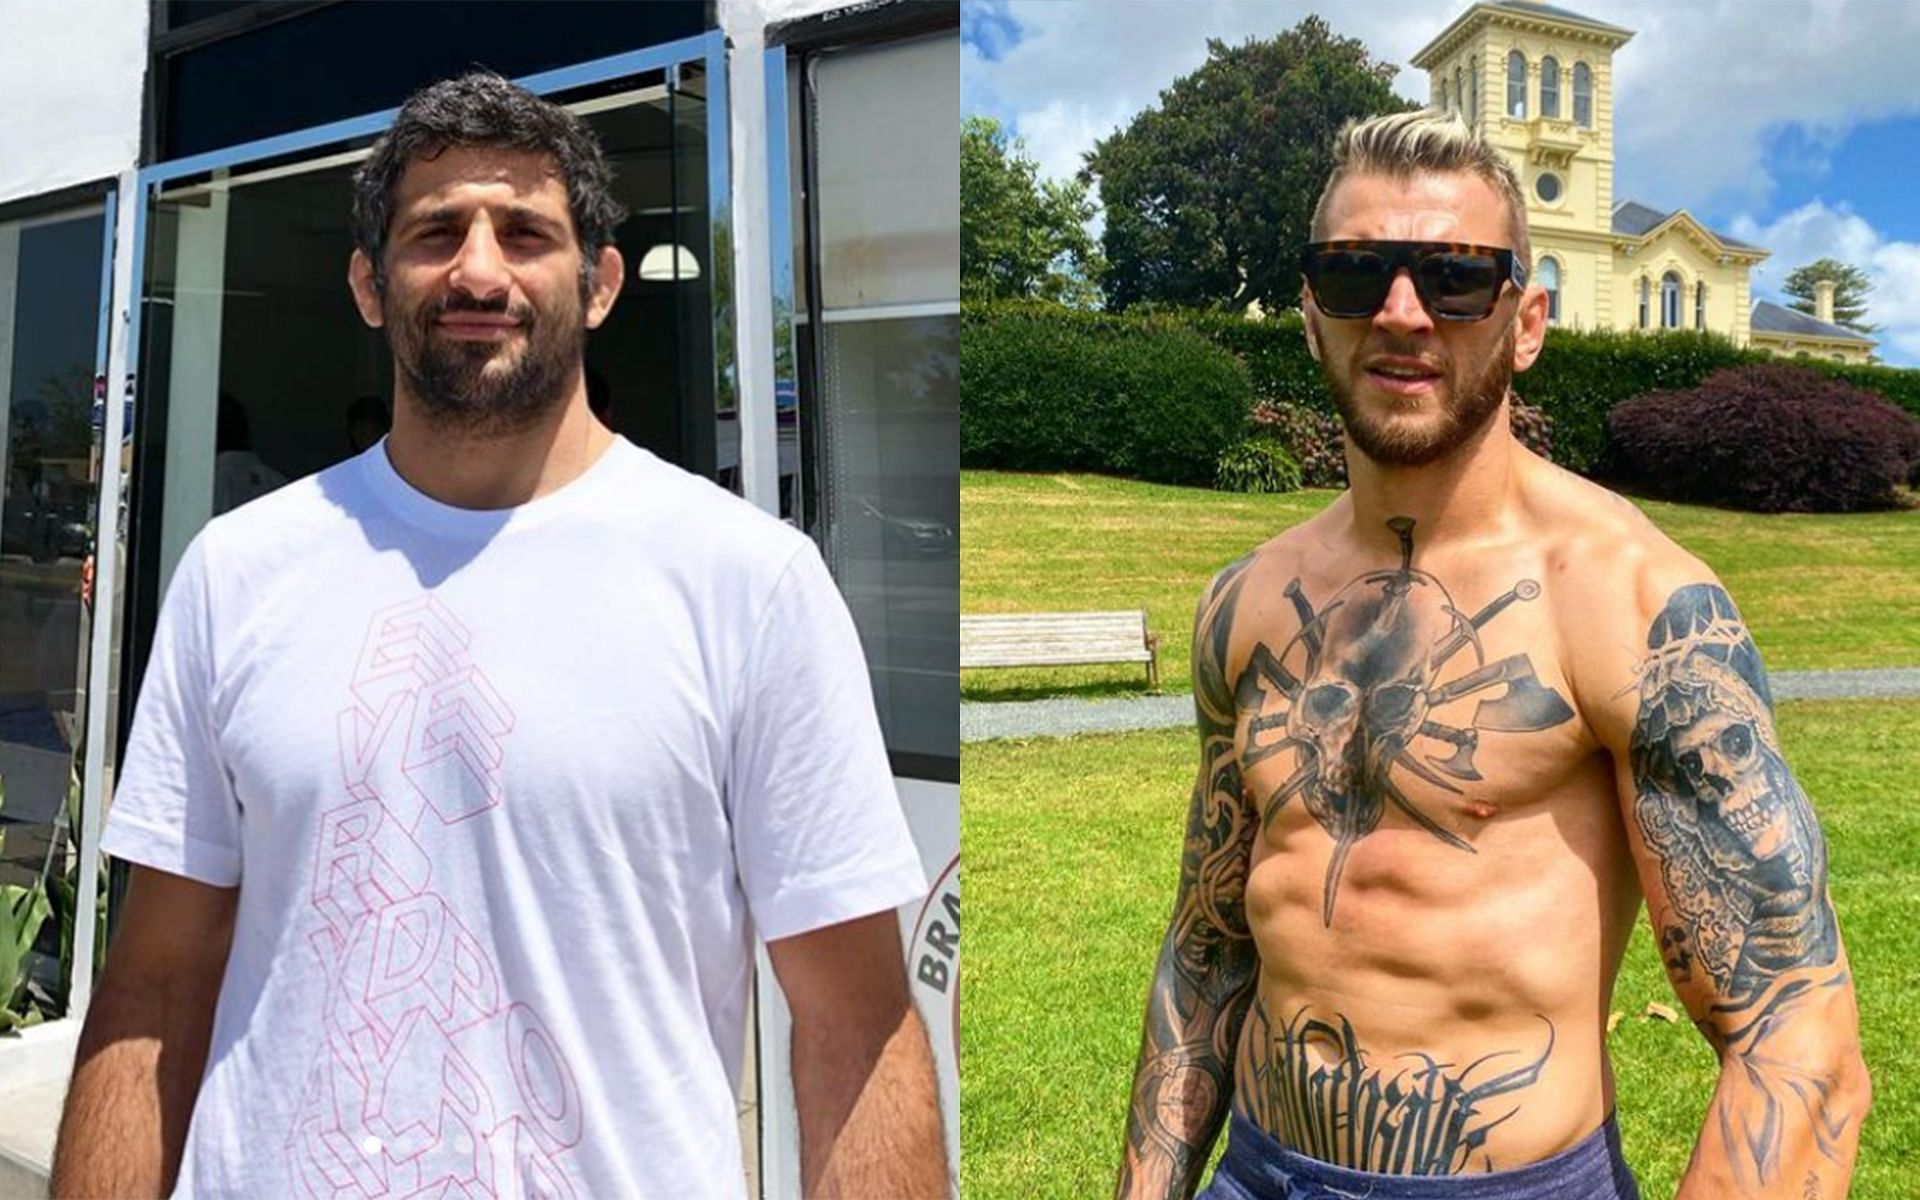 Dan Hooker (right) has been calling out Beneil Dariush (left) for a fight [Images Courtesy: @danhangman and @beneildariush Instagram]